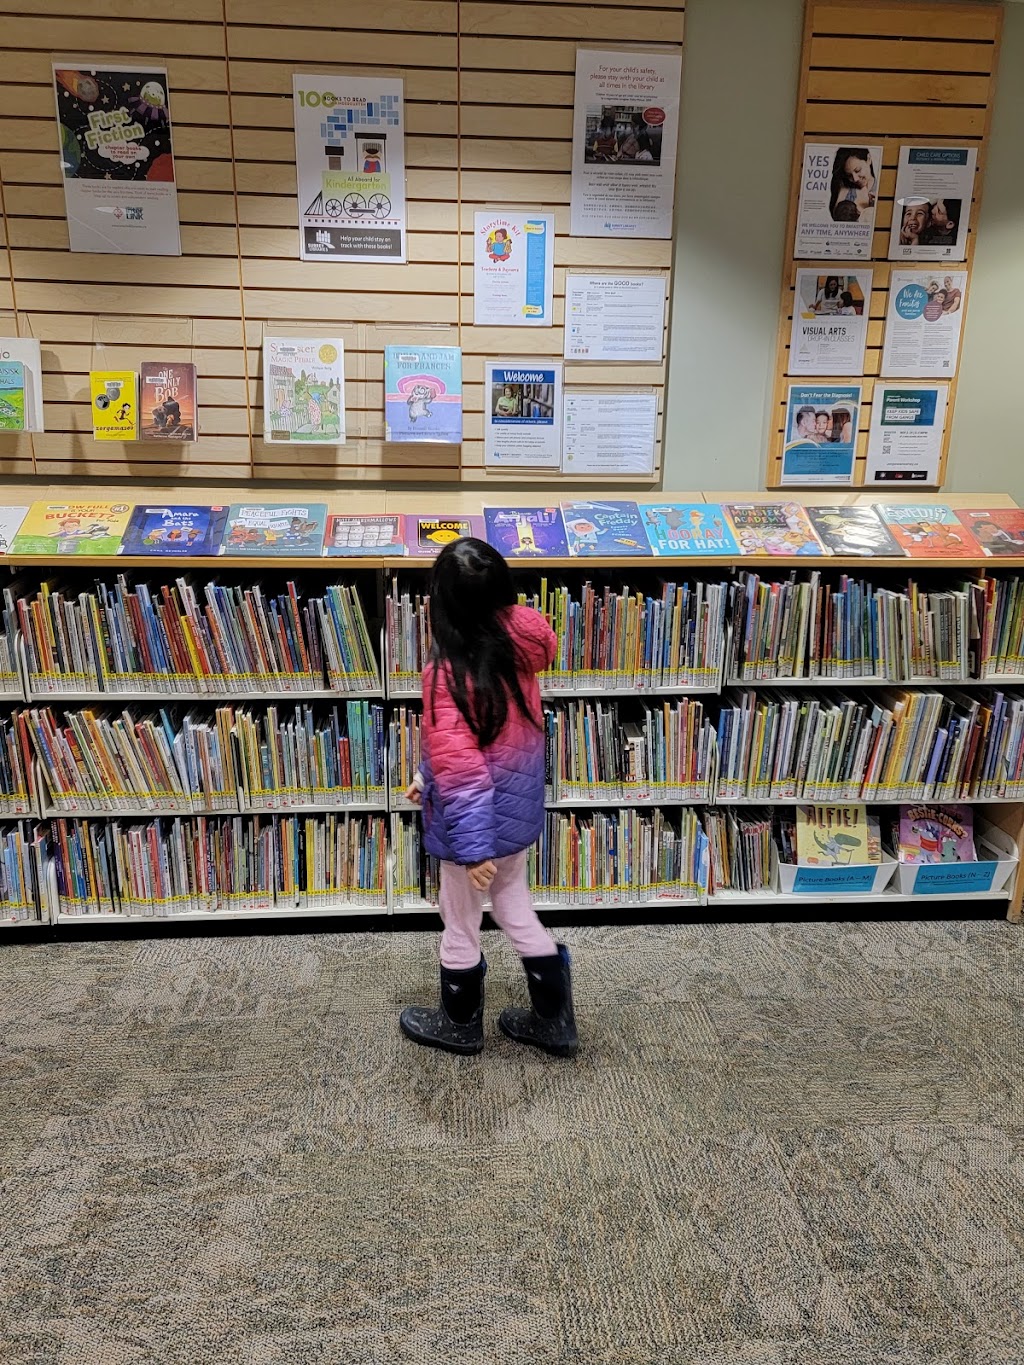 Surrey Libraries - Strawberry Hill Branch | library | 7399 122 St, Surrey, BC V3W 5J2, Canada | 6045015836 OR +1 604-501-5836